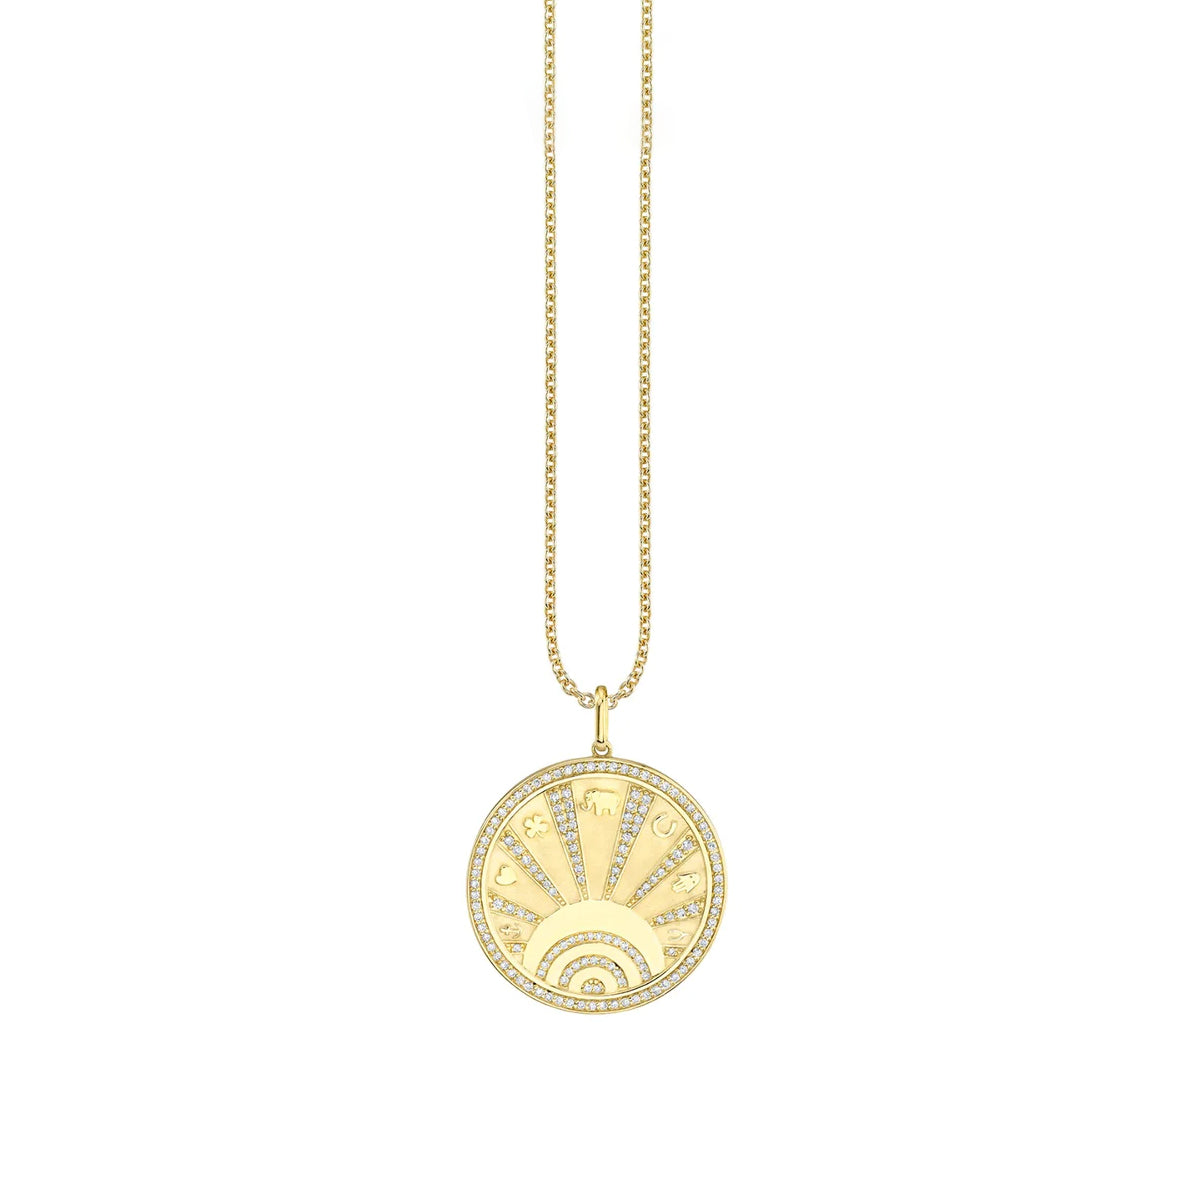 “Luck with Rays Coin” Pendant Necklace - Sydney Evan